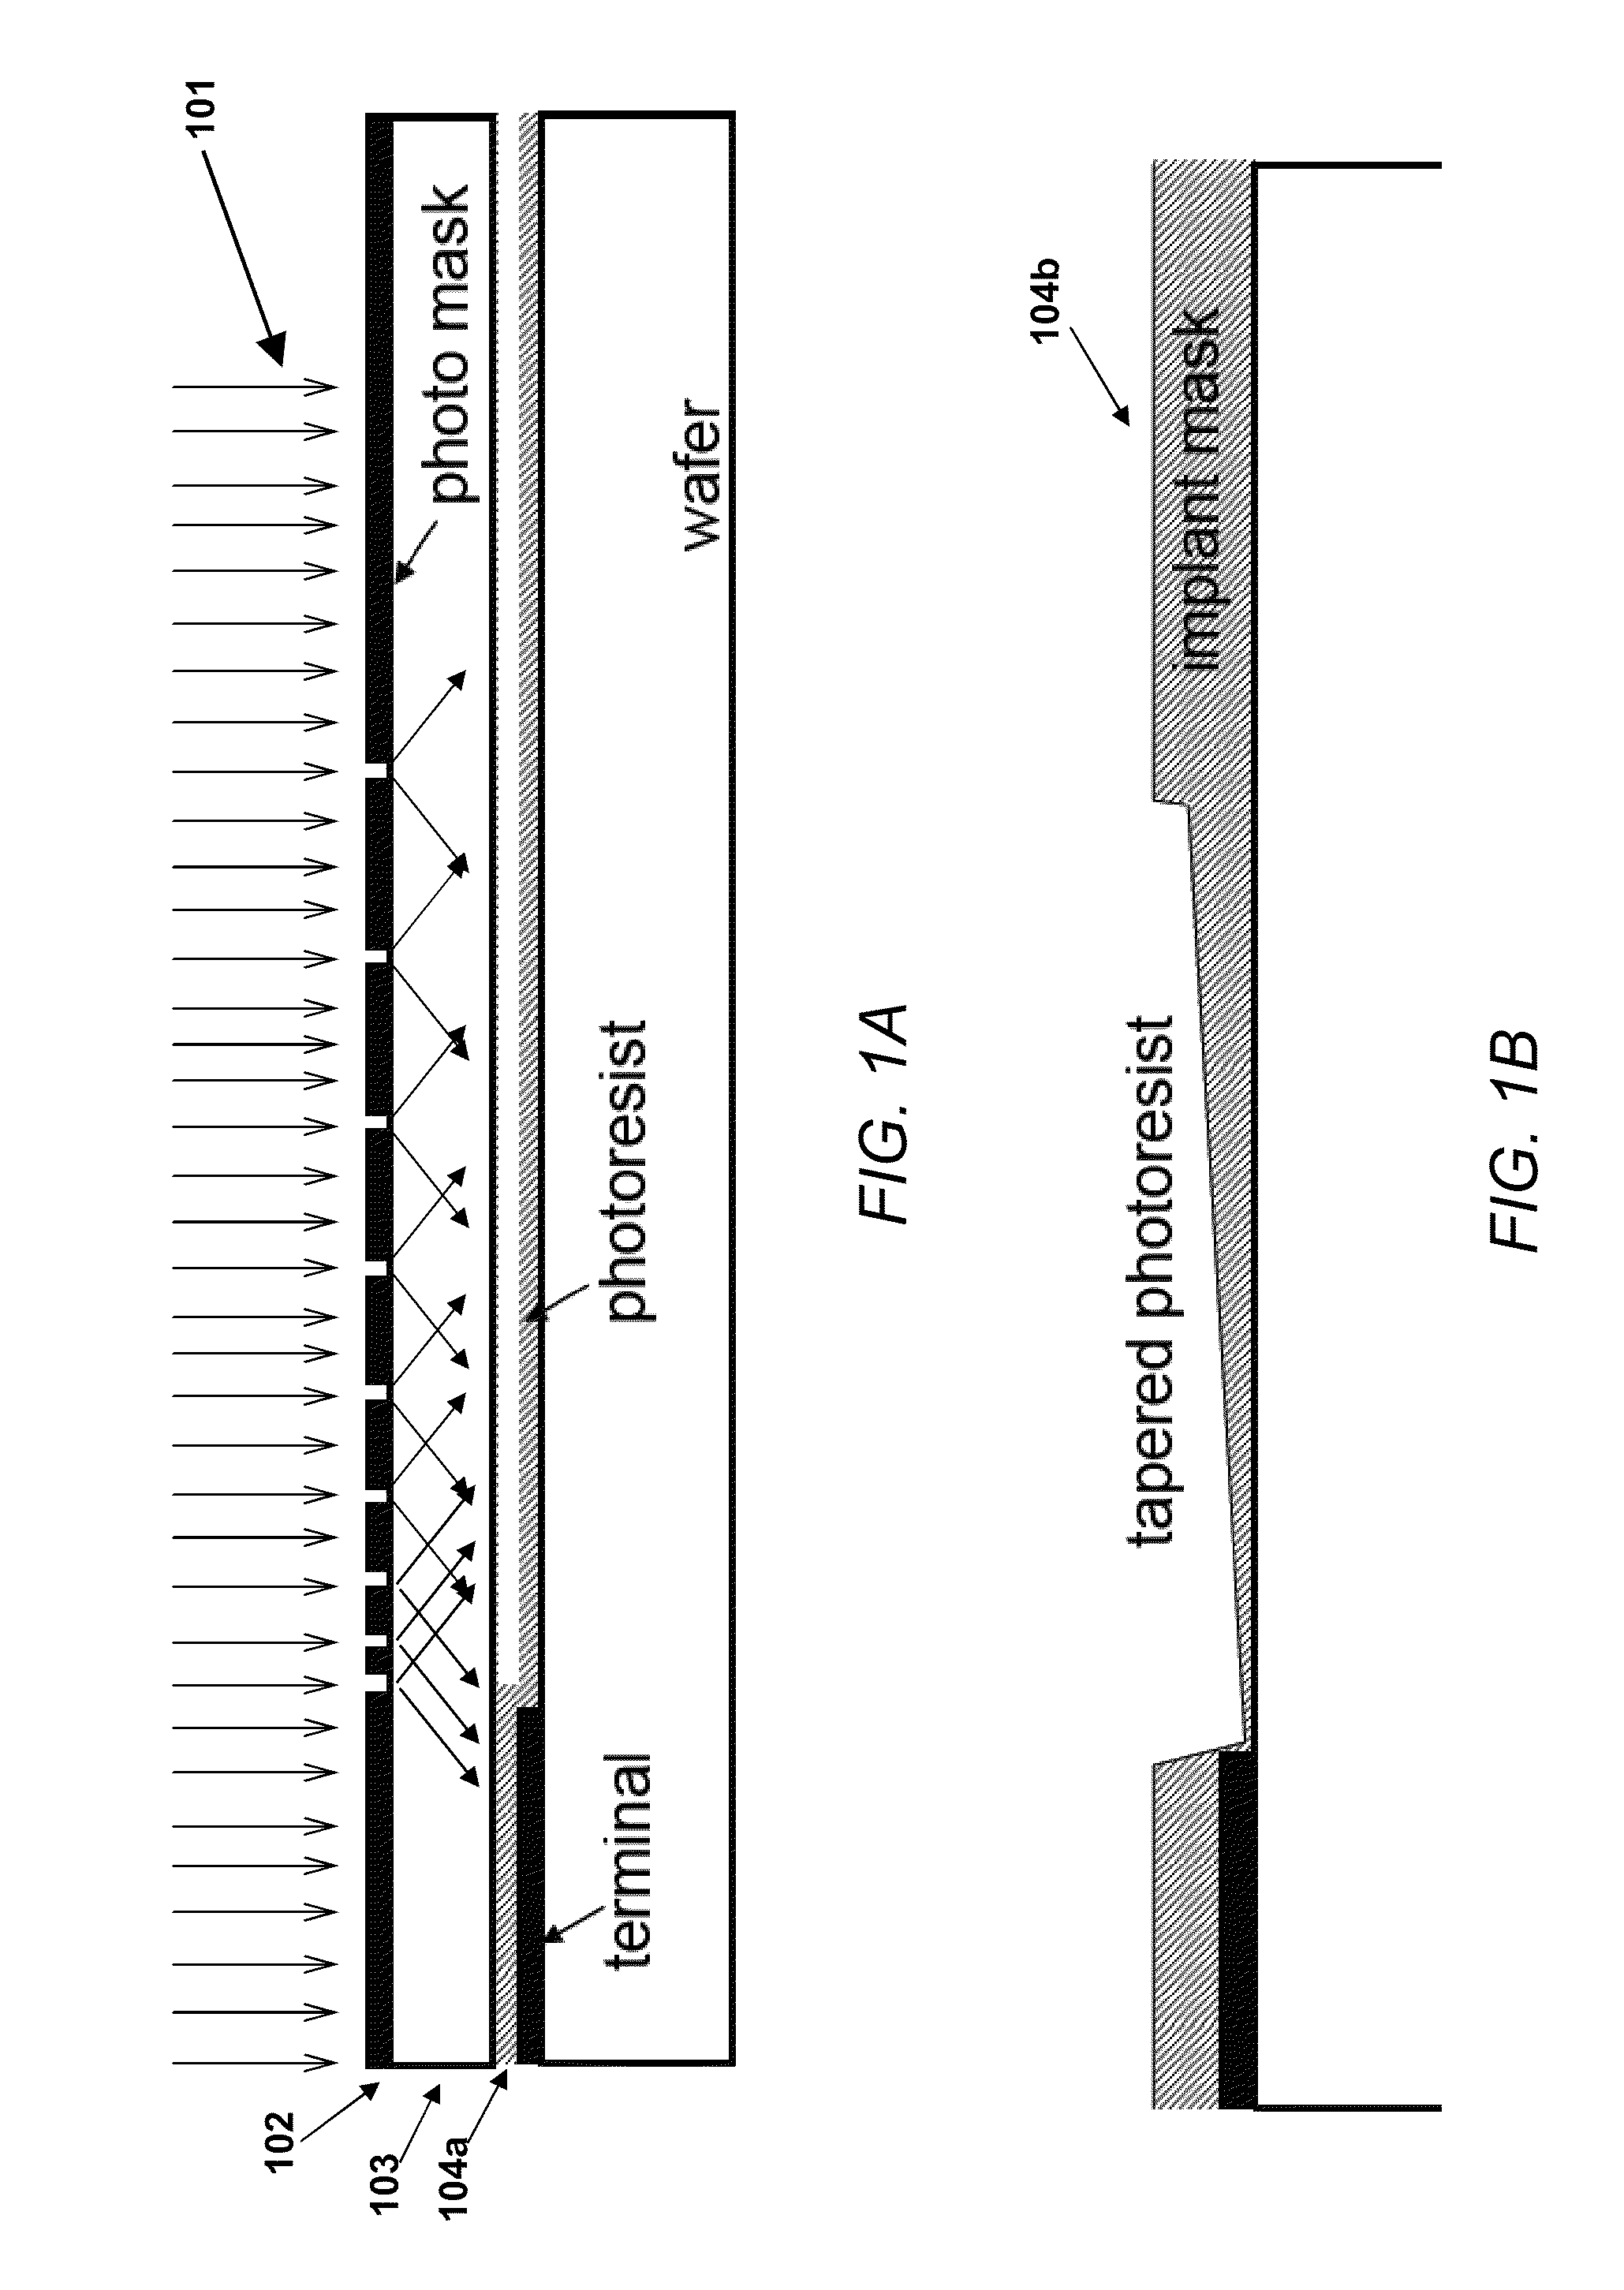 Junction Termination Extension with Controllable Doping Profile and Controllable Width for High-Voltage Electronic Devices